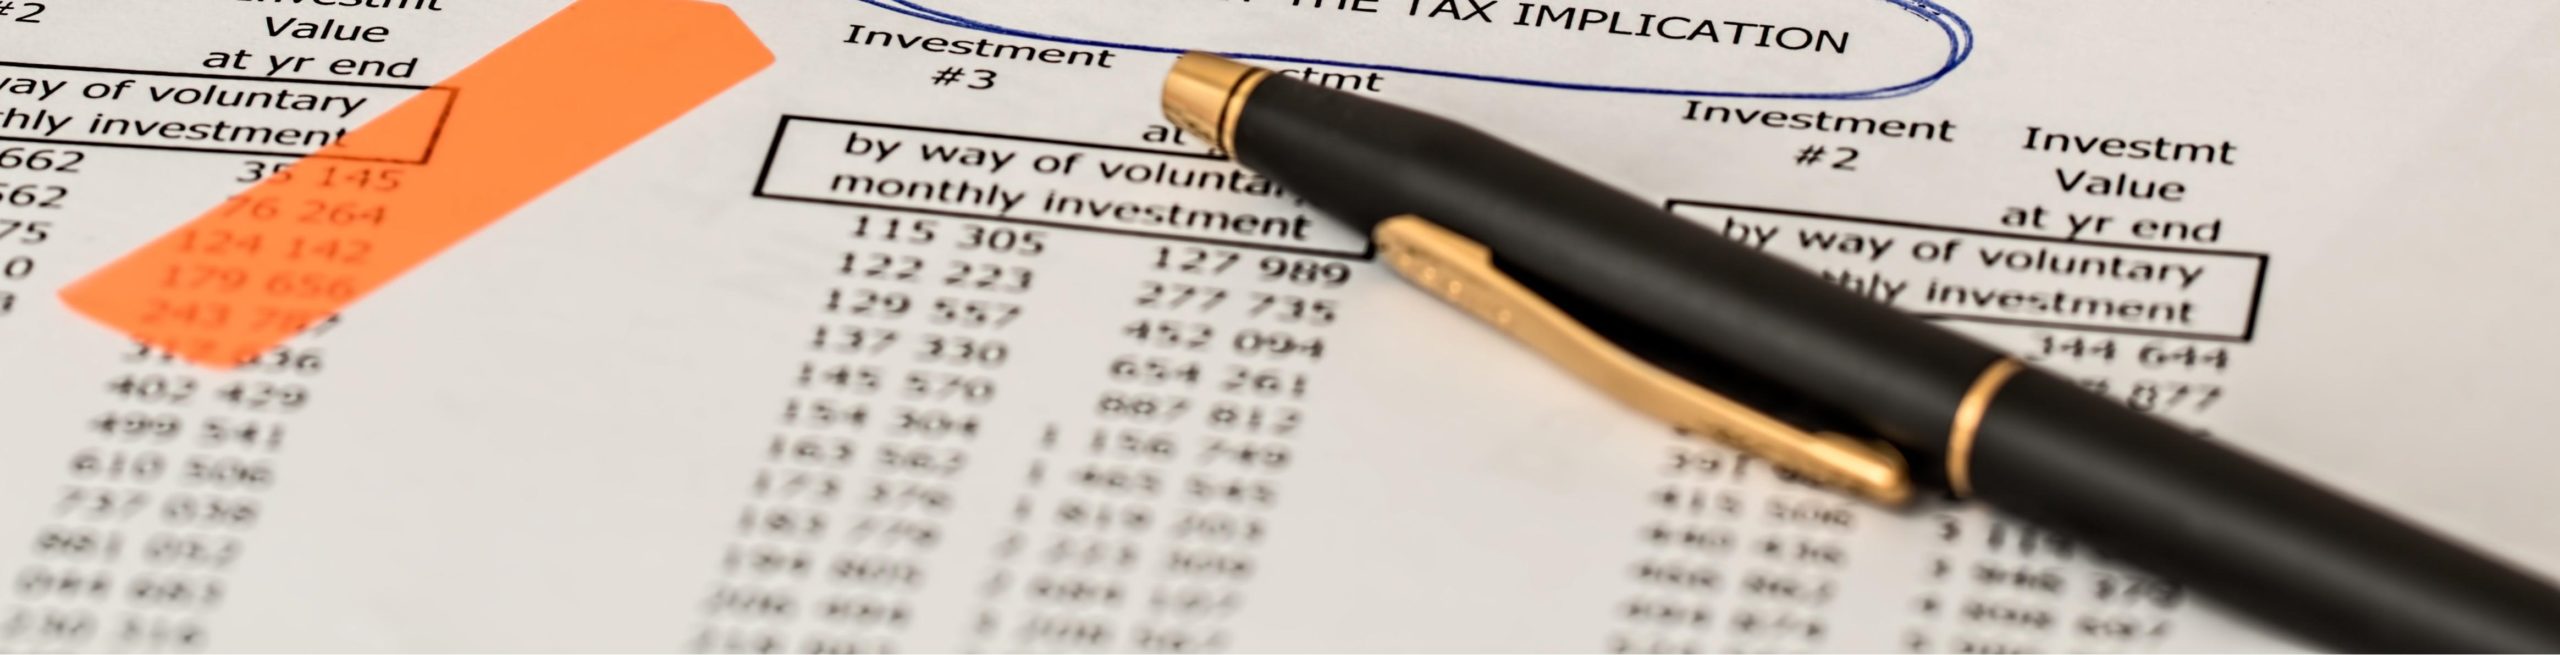 Accrual accounting for investment expenses.